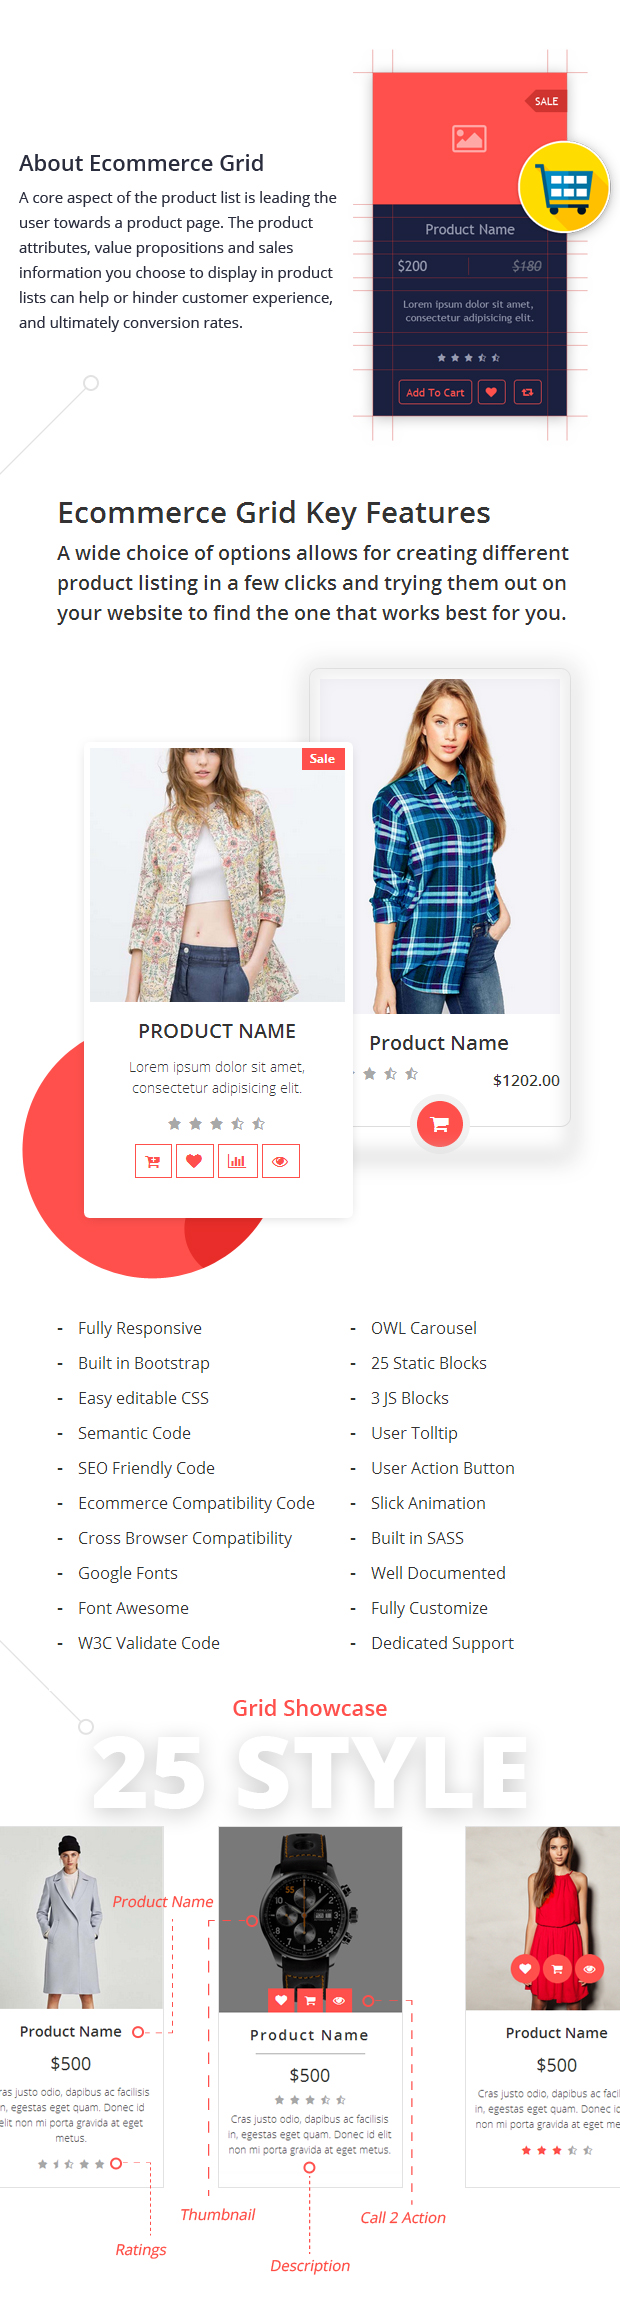 Features Ecommerce Grid is a Multipurpose Product Showcase HTML Widget